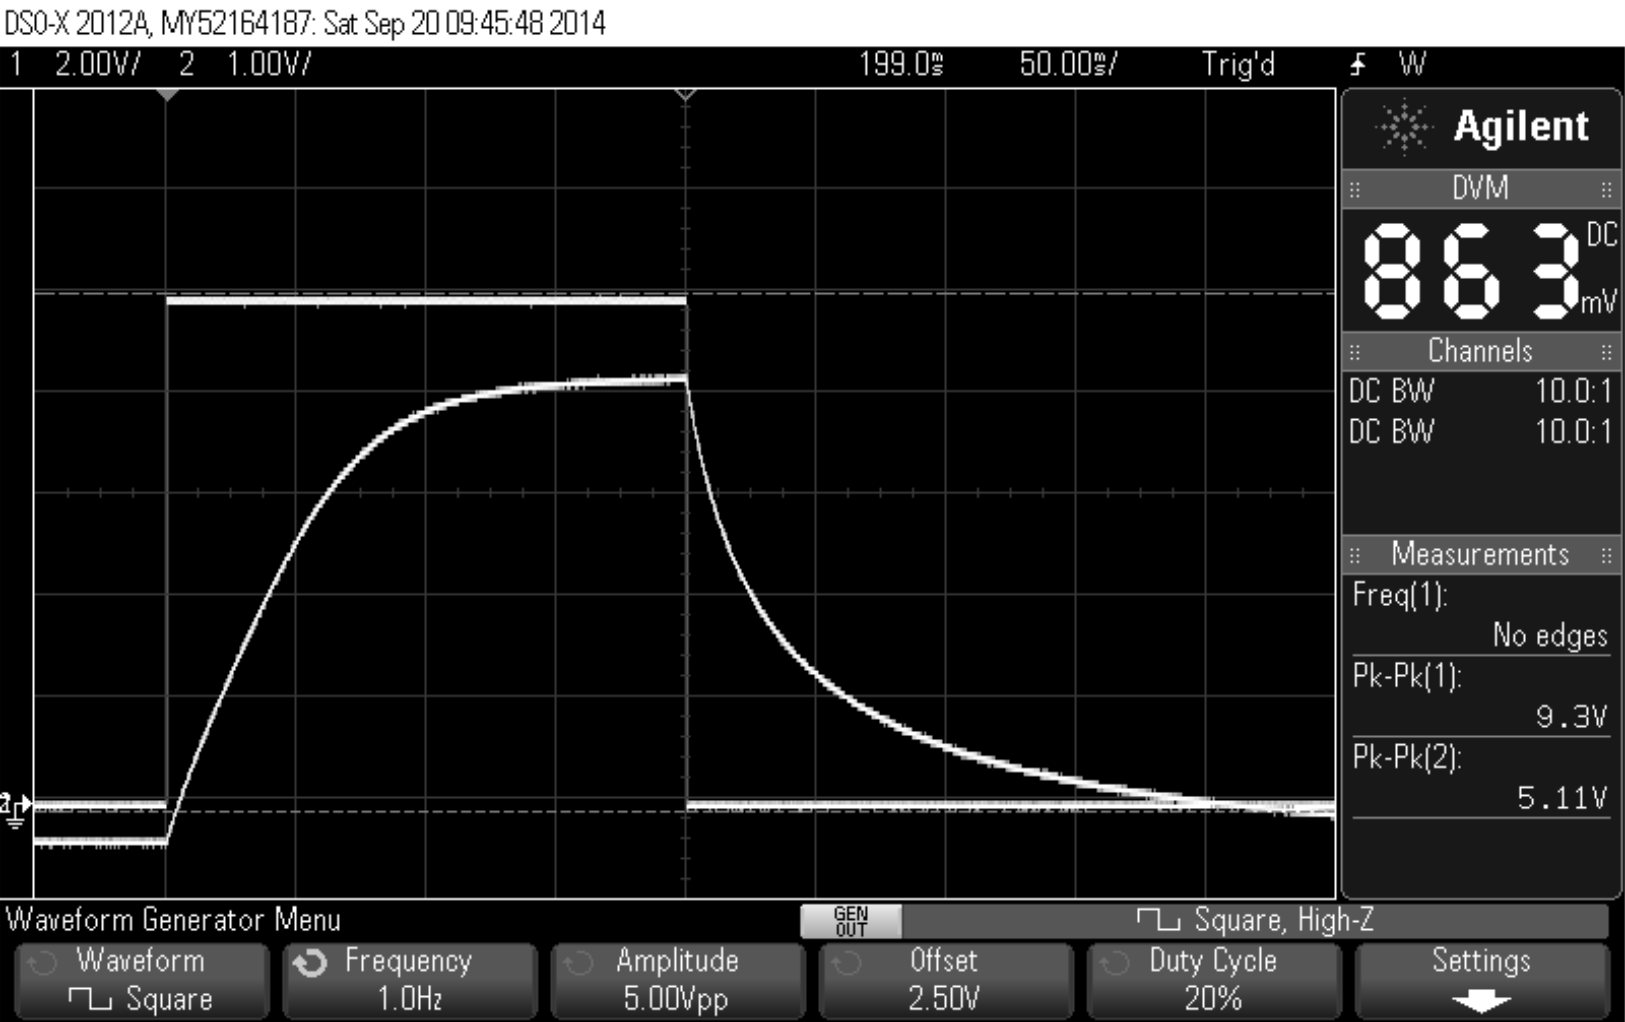 Oscilloscope capture showing a typical envelope response